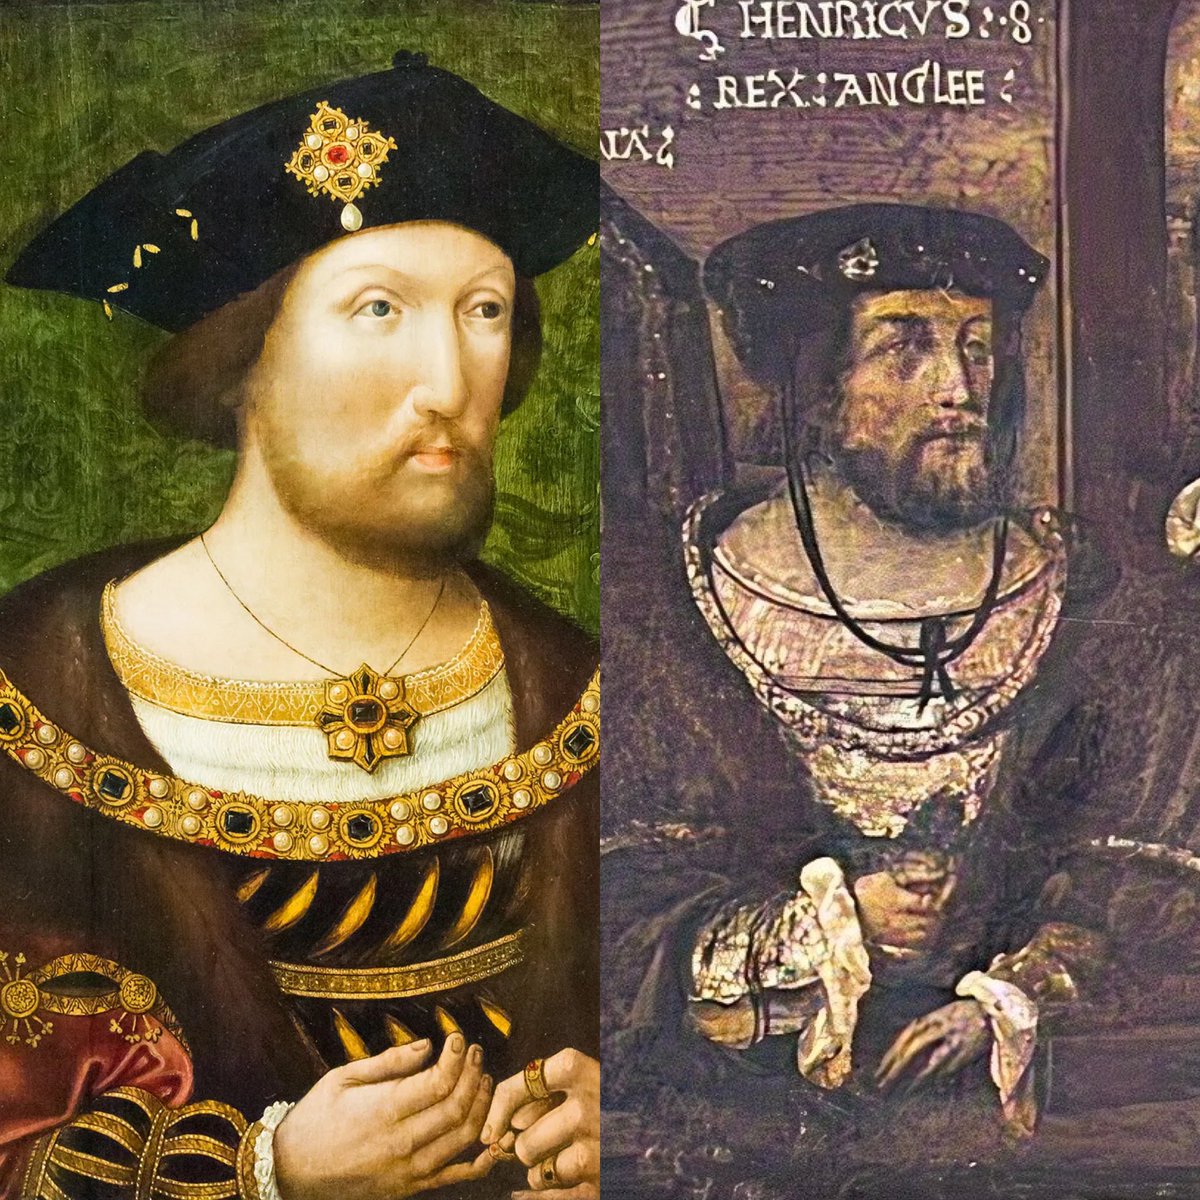 Although further details are yet undisclosed, this is already shaping to be an extraordinary find. 

'The Family of #HenryVIII and #CatherineofAragon,' photo courtesy of Dr. Emma Cahill Marrón. Colorized and enhanced by Tudor Extra.